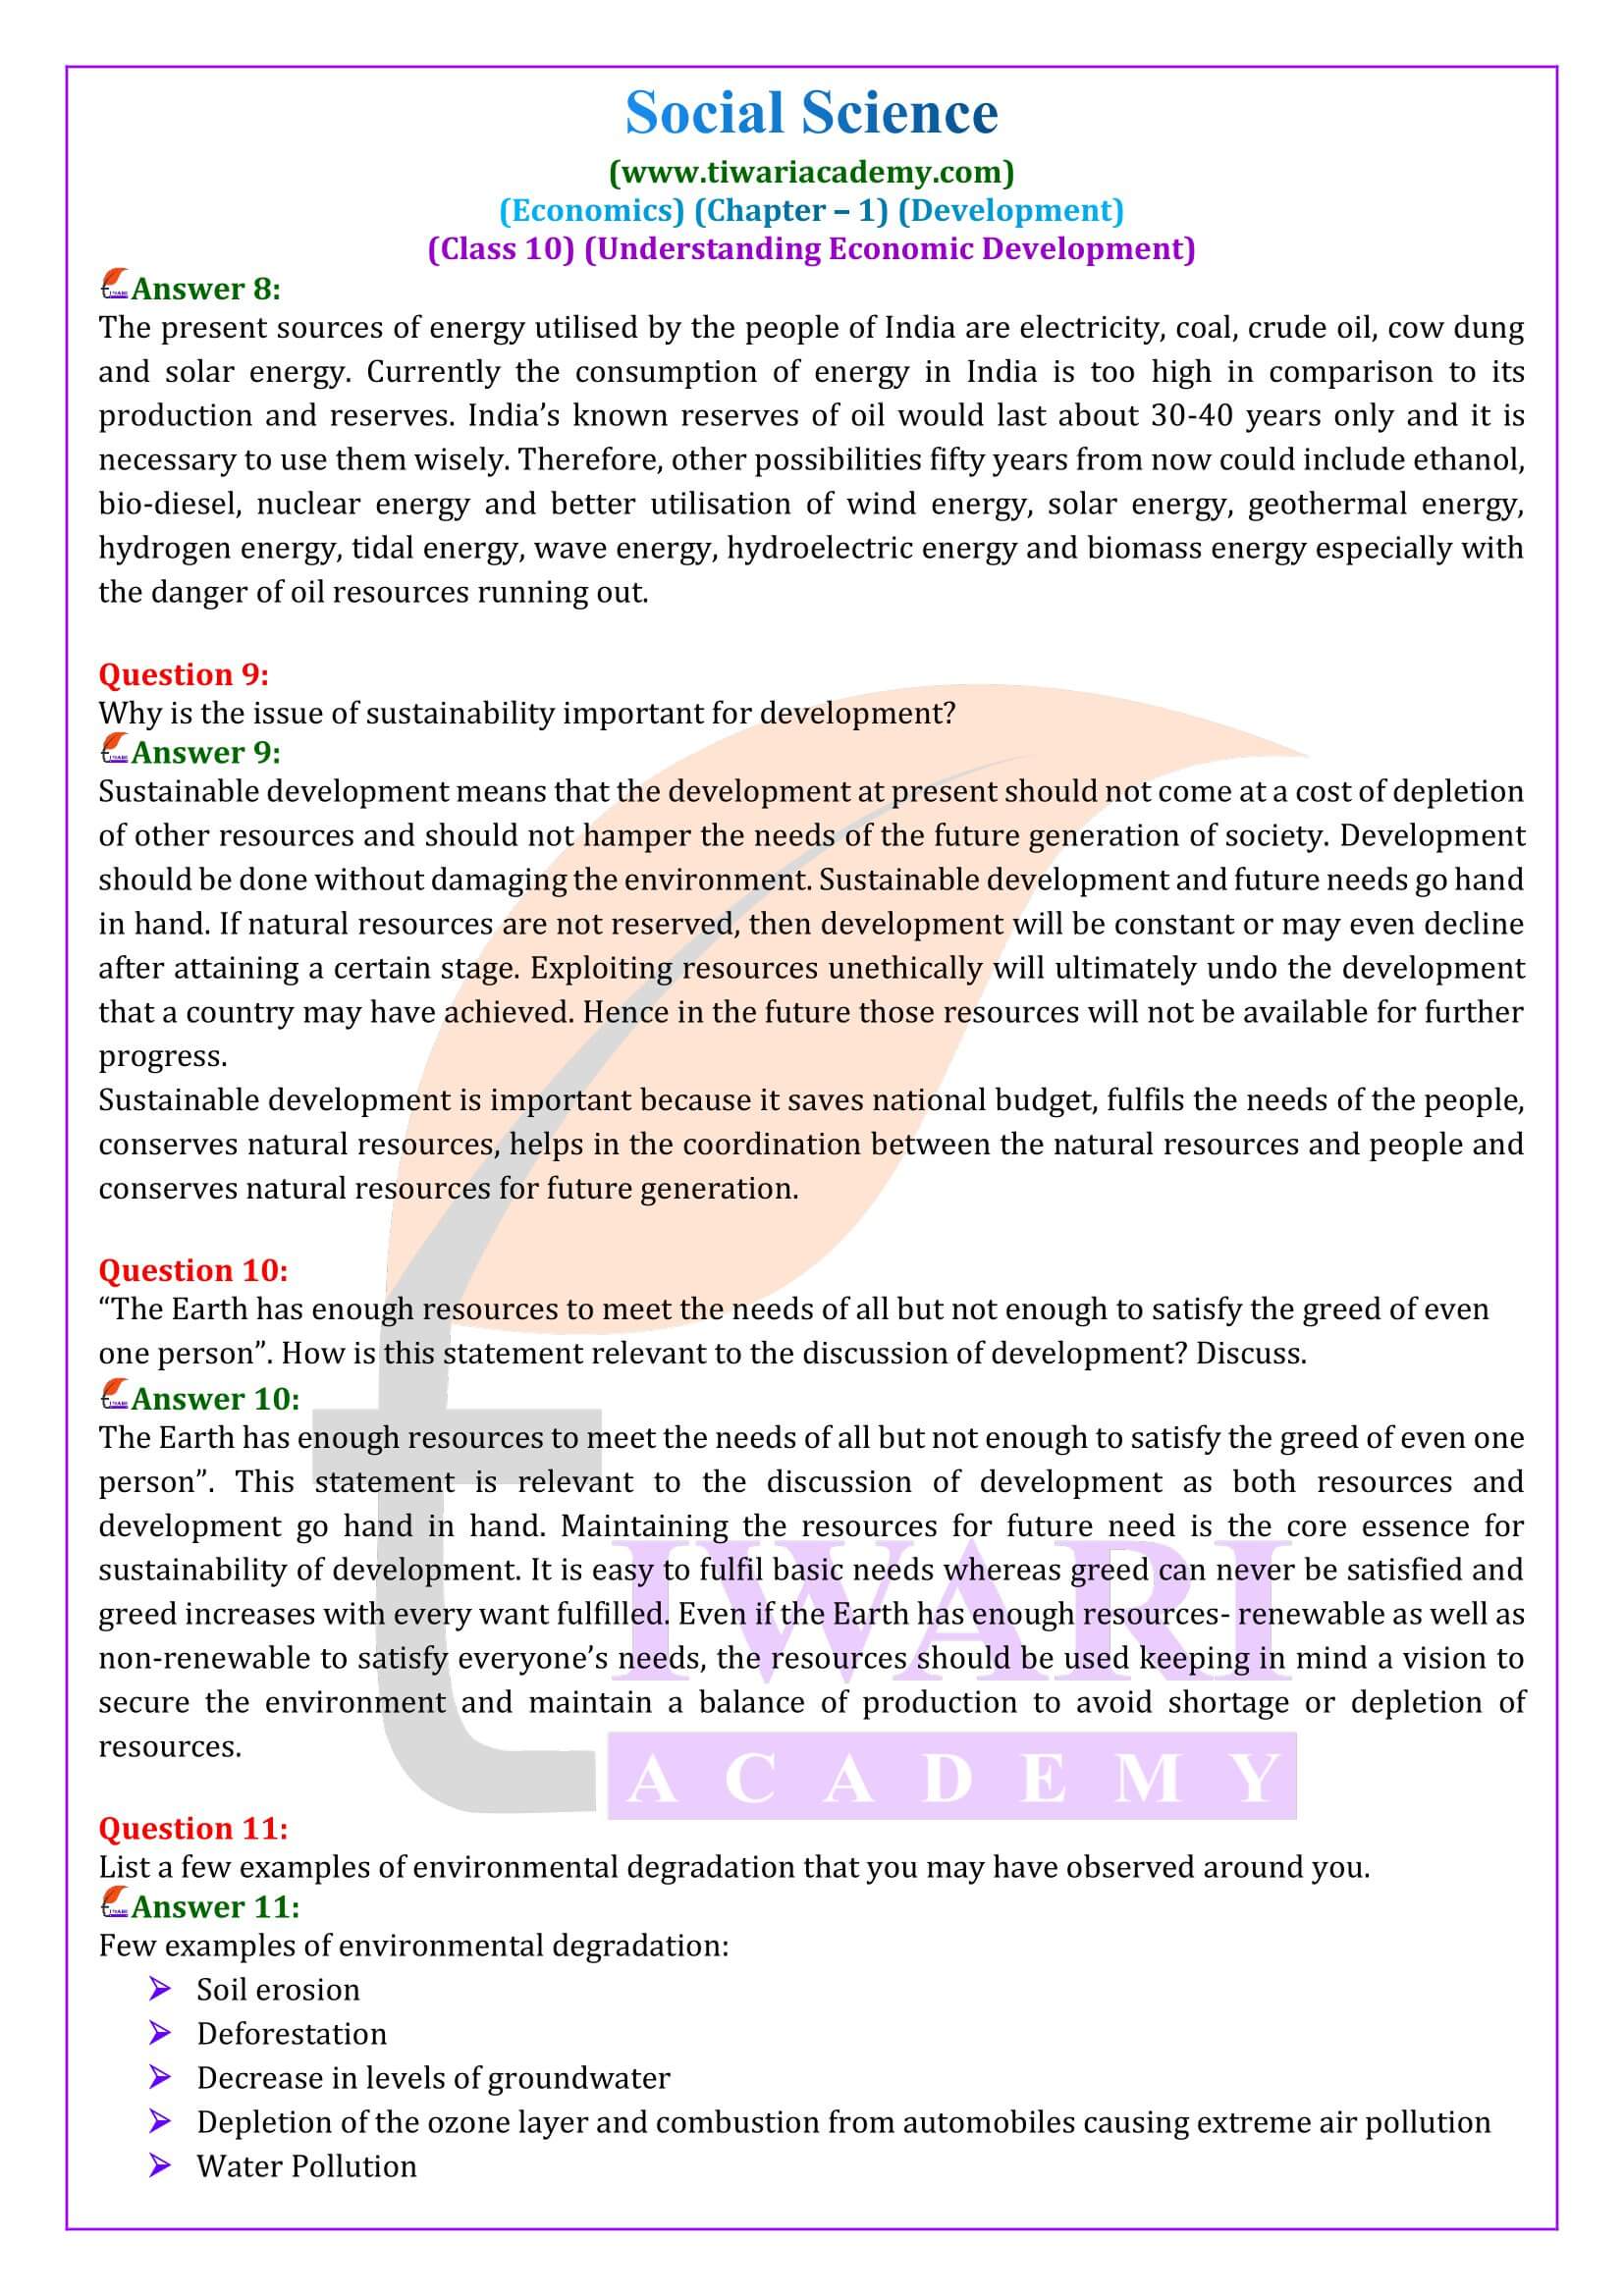 NCERT Solutions for Class 10 Economics Chapter 1